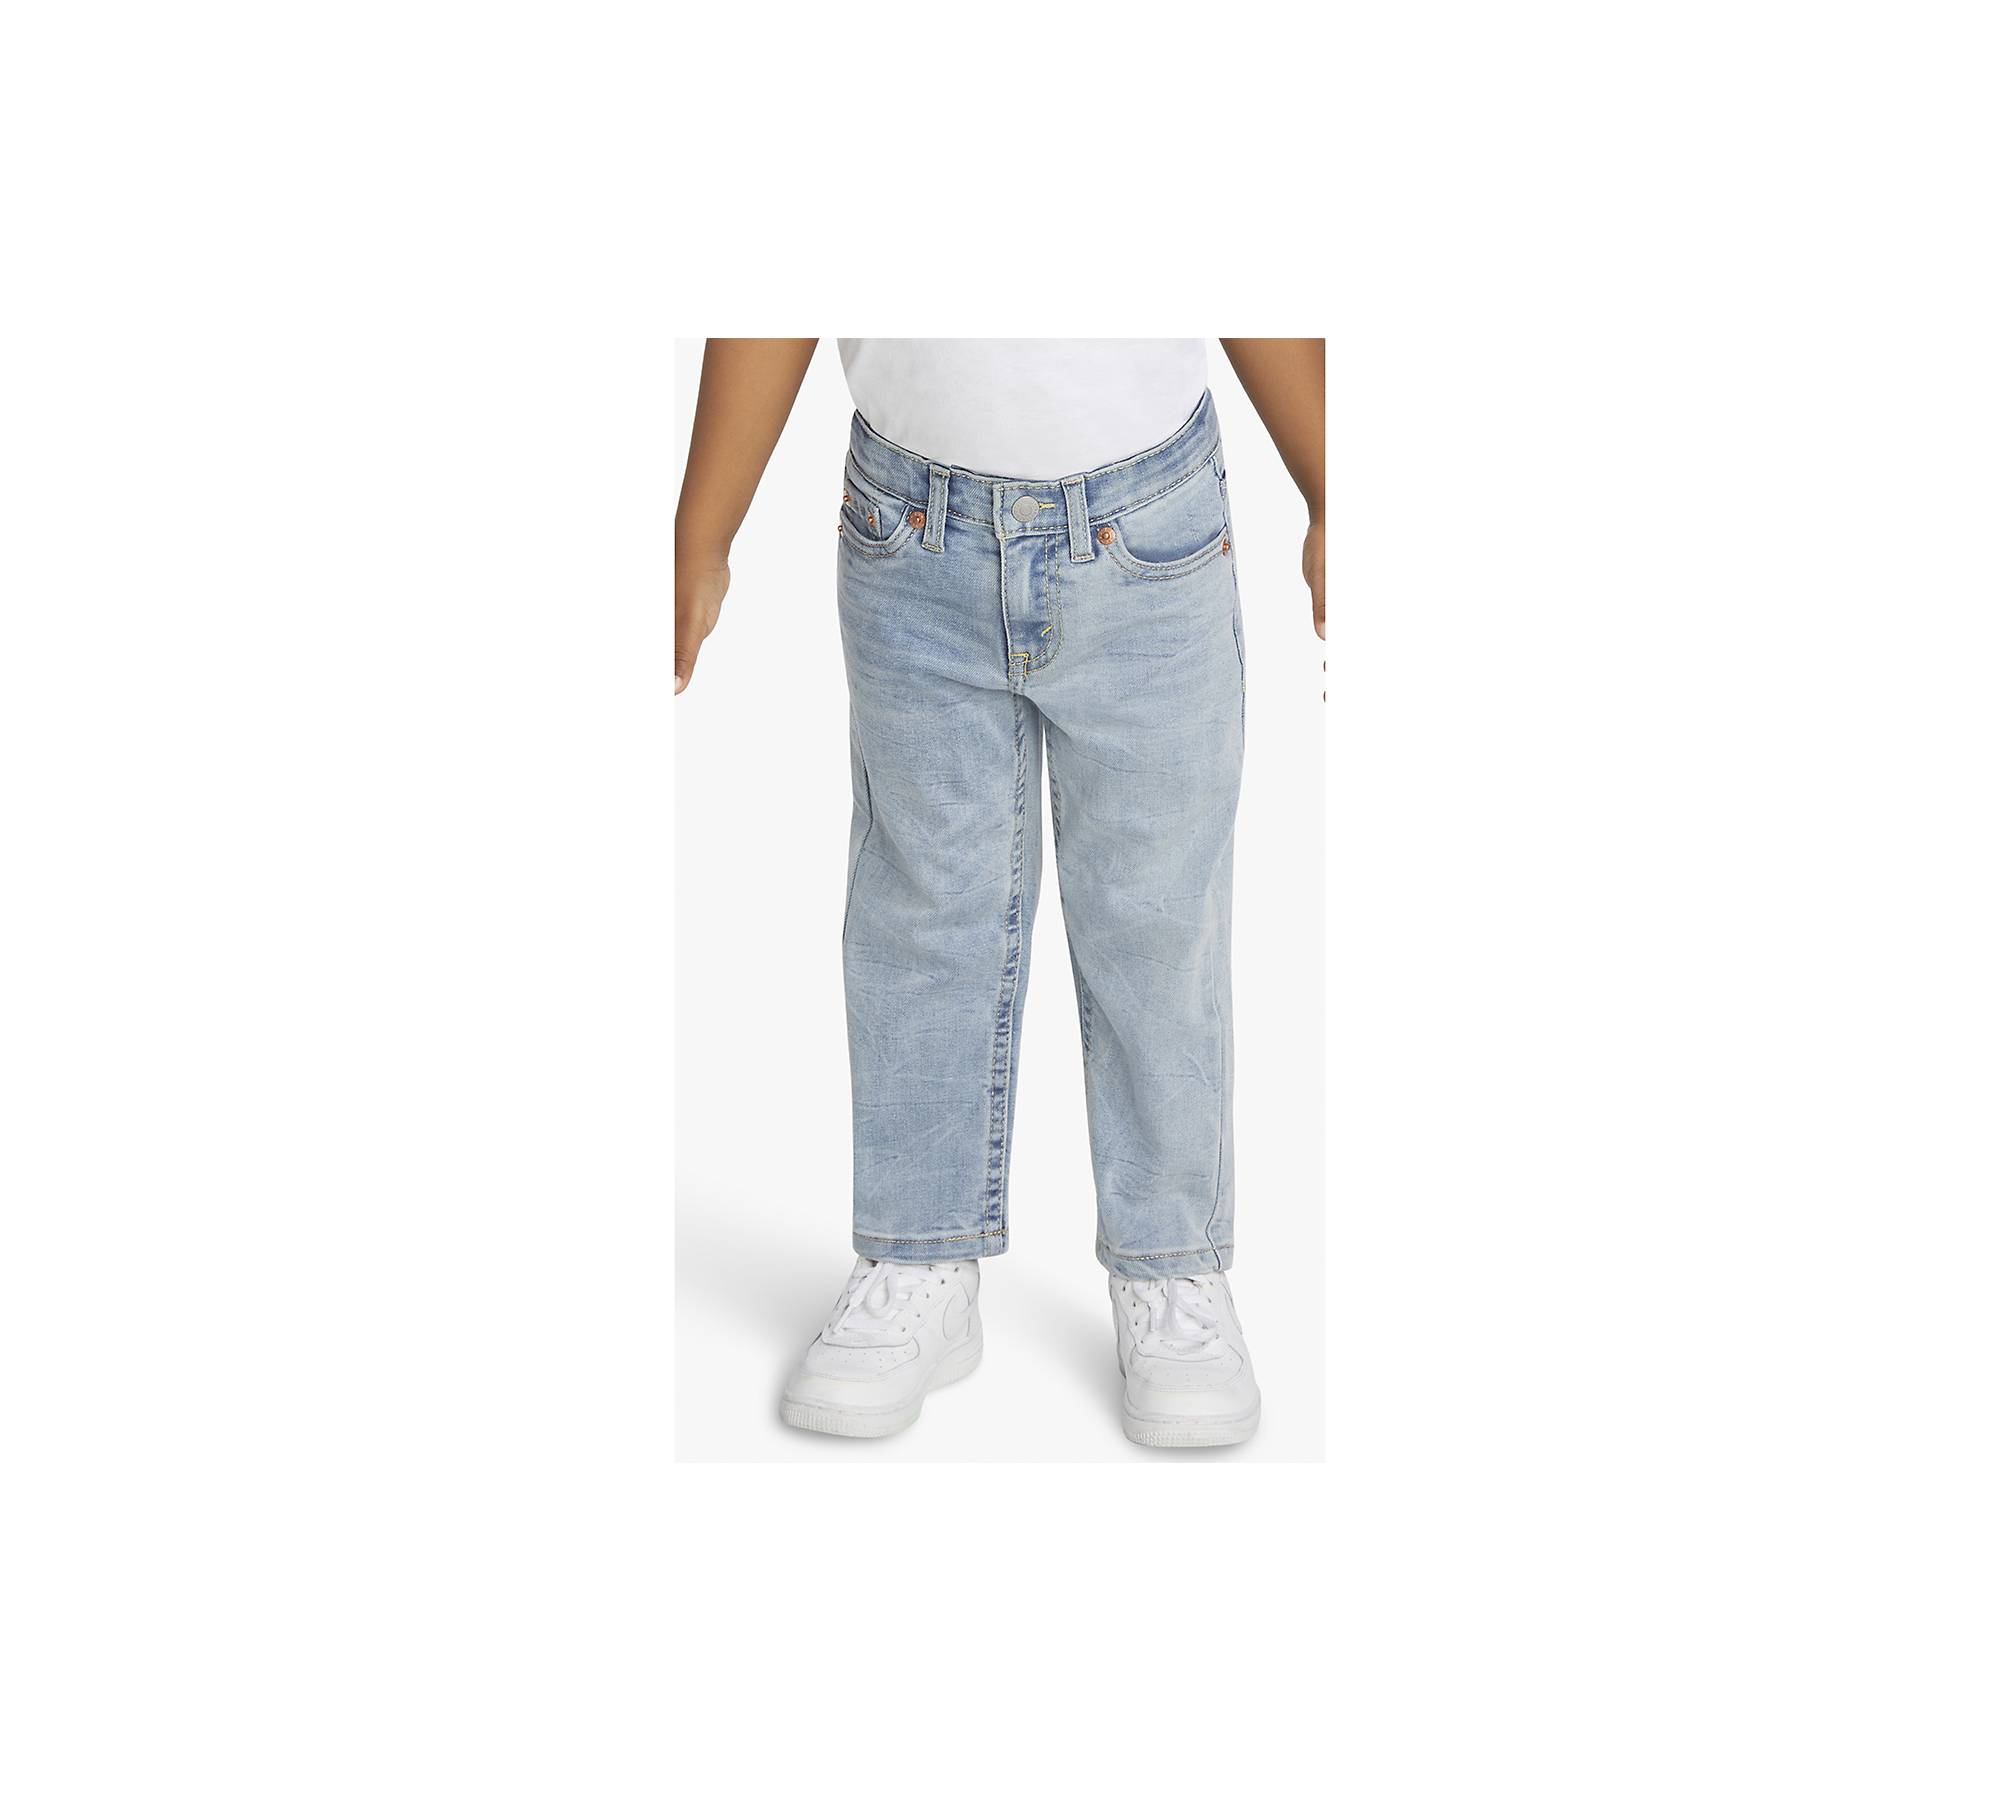 502™ Taper Fit Strong Performance Jeans Toddler Boys 2t-4t - Light